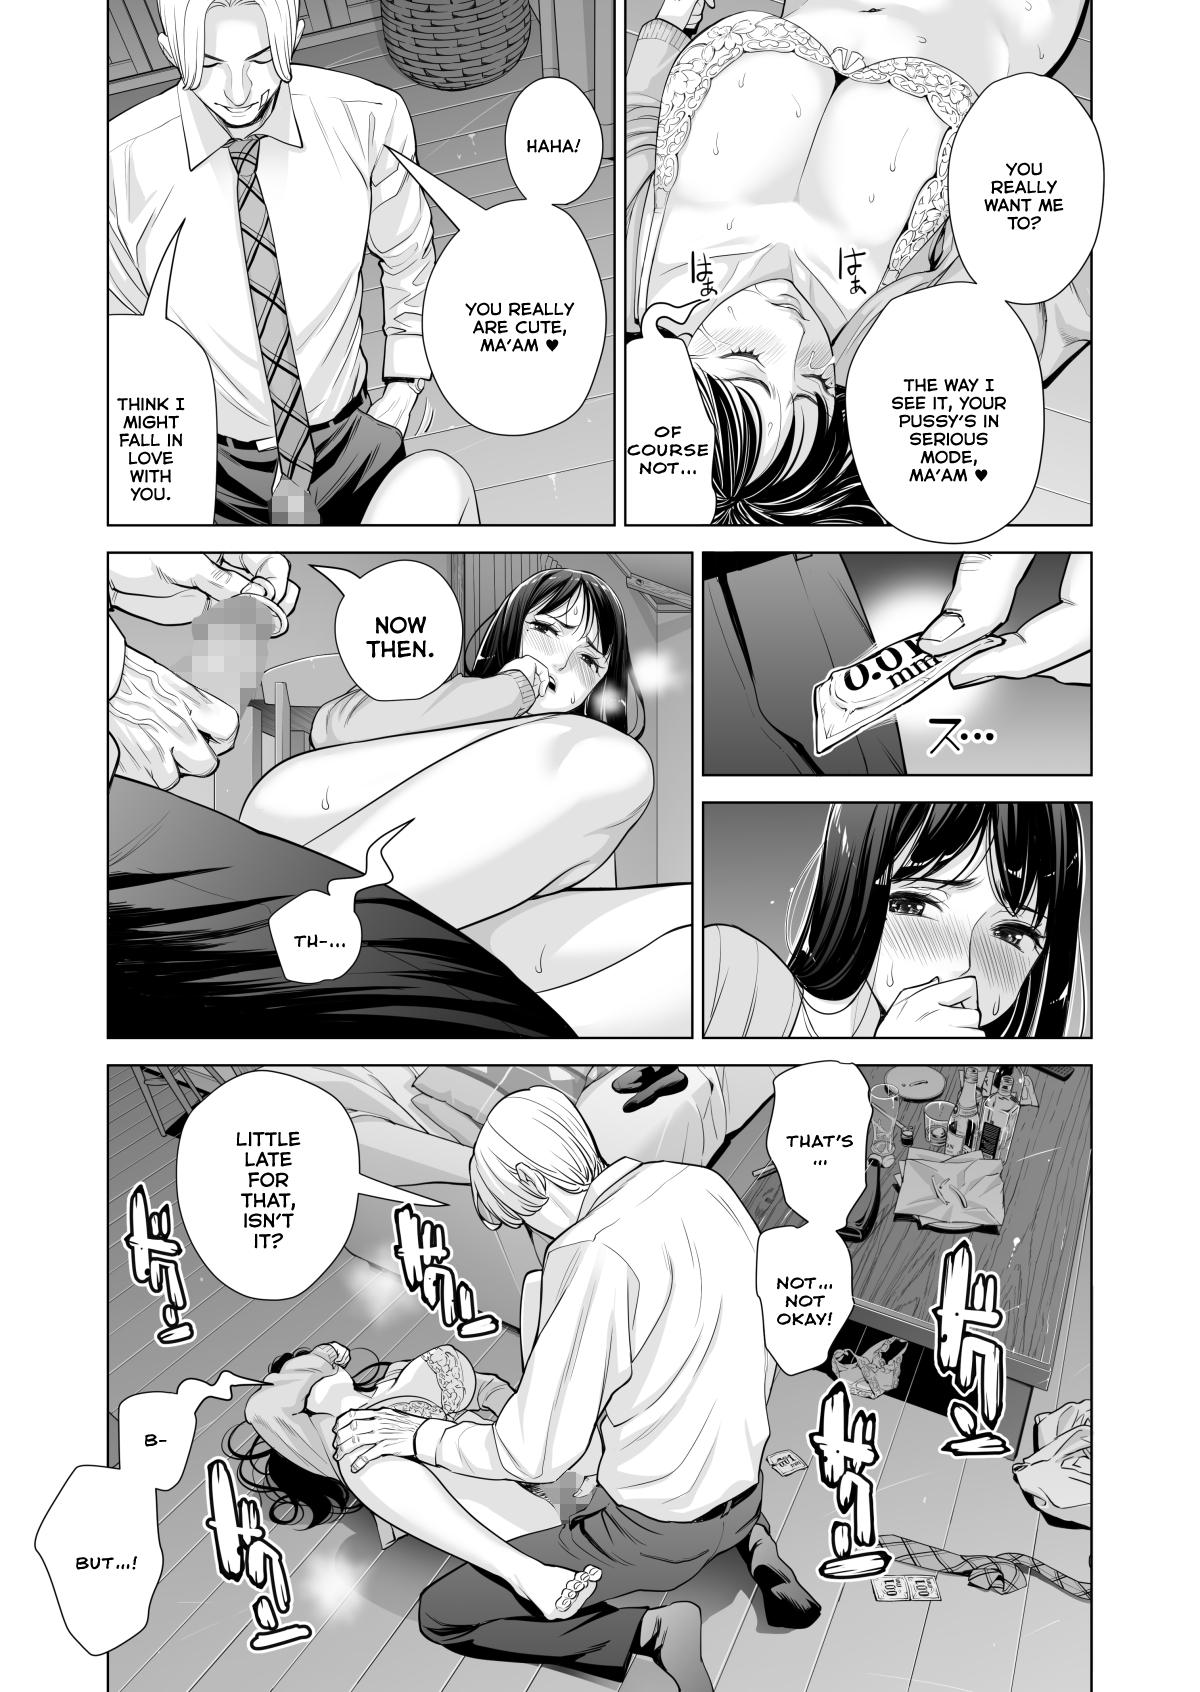 [HGT Lab (Tsusauto)] Tsukiyo no Midare Zake (Kouhen) Moonlit Intoxication ~ A Housewife Stolen by a Coworker Besides her Blackout Drunk Husband ~ Chapter 2 [English] 33